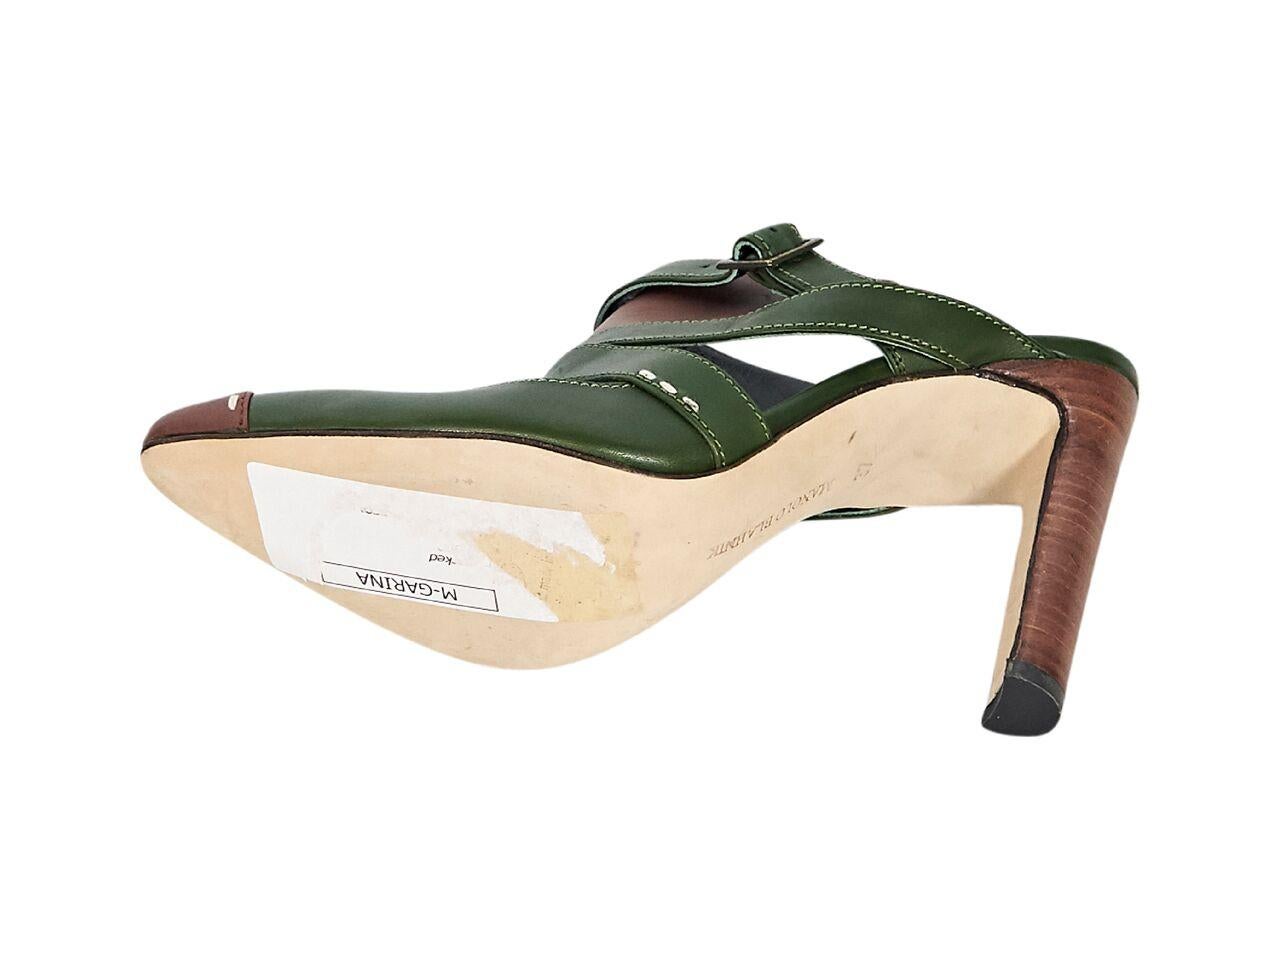 Product details:  Green and brown strappy leather mules by Manolo Blahnik.  Round toe.  Stacked heel.  Slip-on style.  4